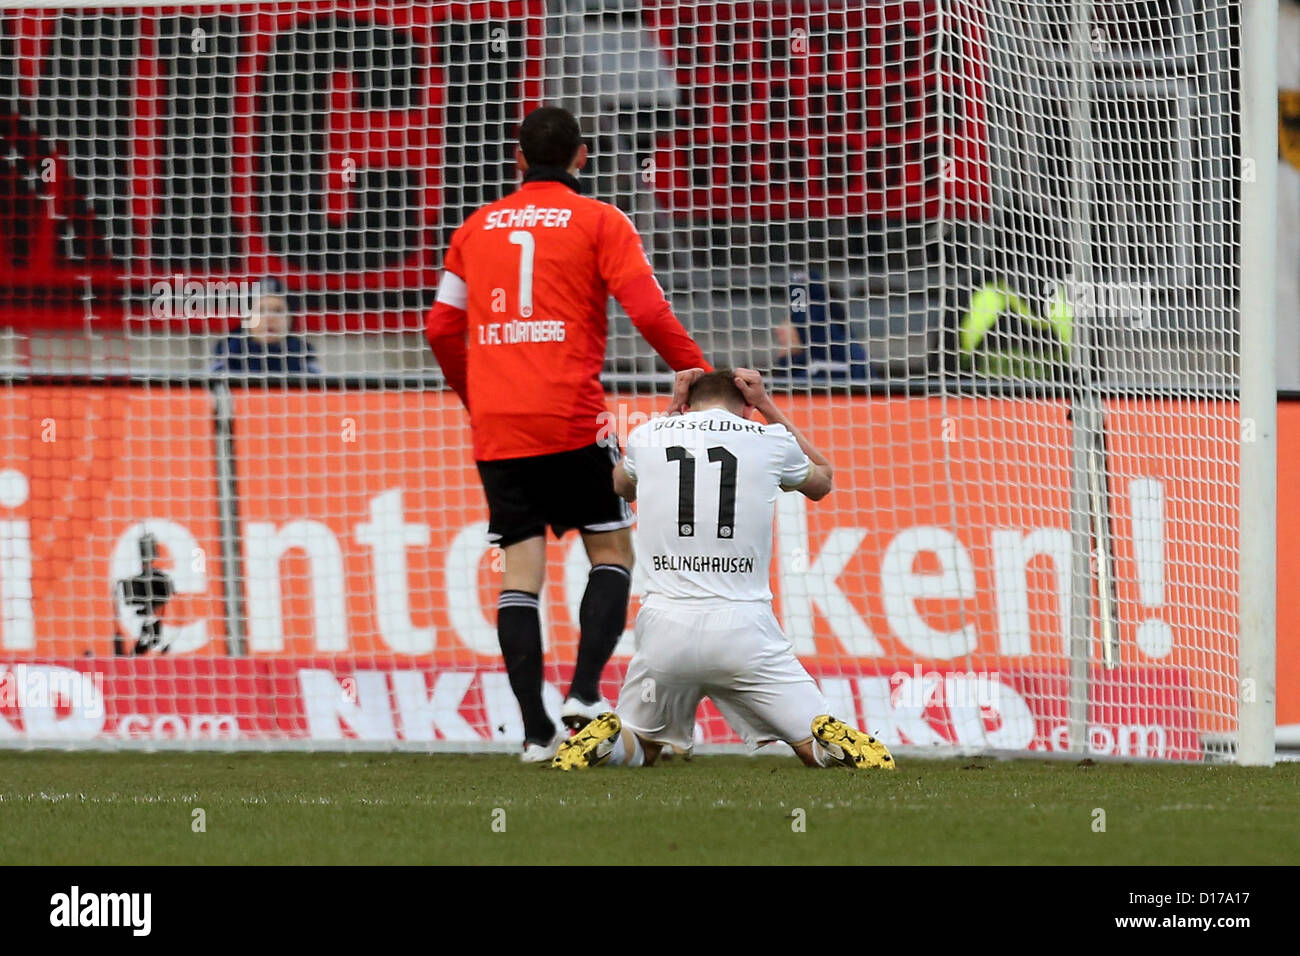 Nuremberg's goalkeeper Raphael Schaefer (L) stands next Duesseldorf's Axel Bellinghausen who reacts missed scoring opportunity during Bundesliga soccer match between FC Nuremberg Fortuna Duesseldorf Nuremberg Stadium in Nuremberg Germany 08 December 2012 Photo: DANIEL KARMANN (ATTENTION: EMBARGO CONDITIONS! DFL permits further utilisation up 15 pictures only (no sequntial pictures or video-similar series pictures allowed) via internet online media during match (including halftime) taken inside stadium and/or prior start match DFL permits unrestricted transmission digitised recordings during Stock Photo